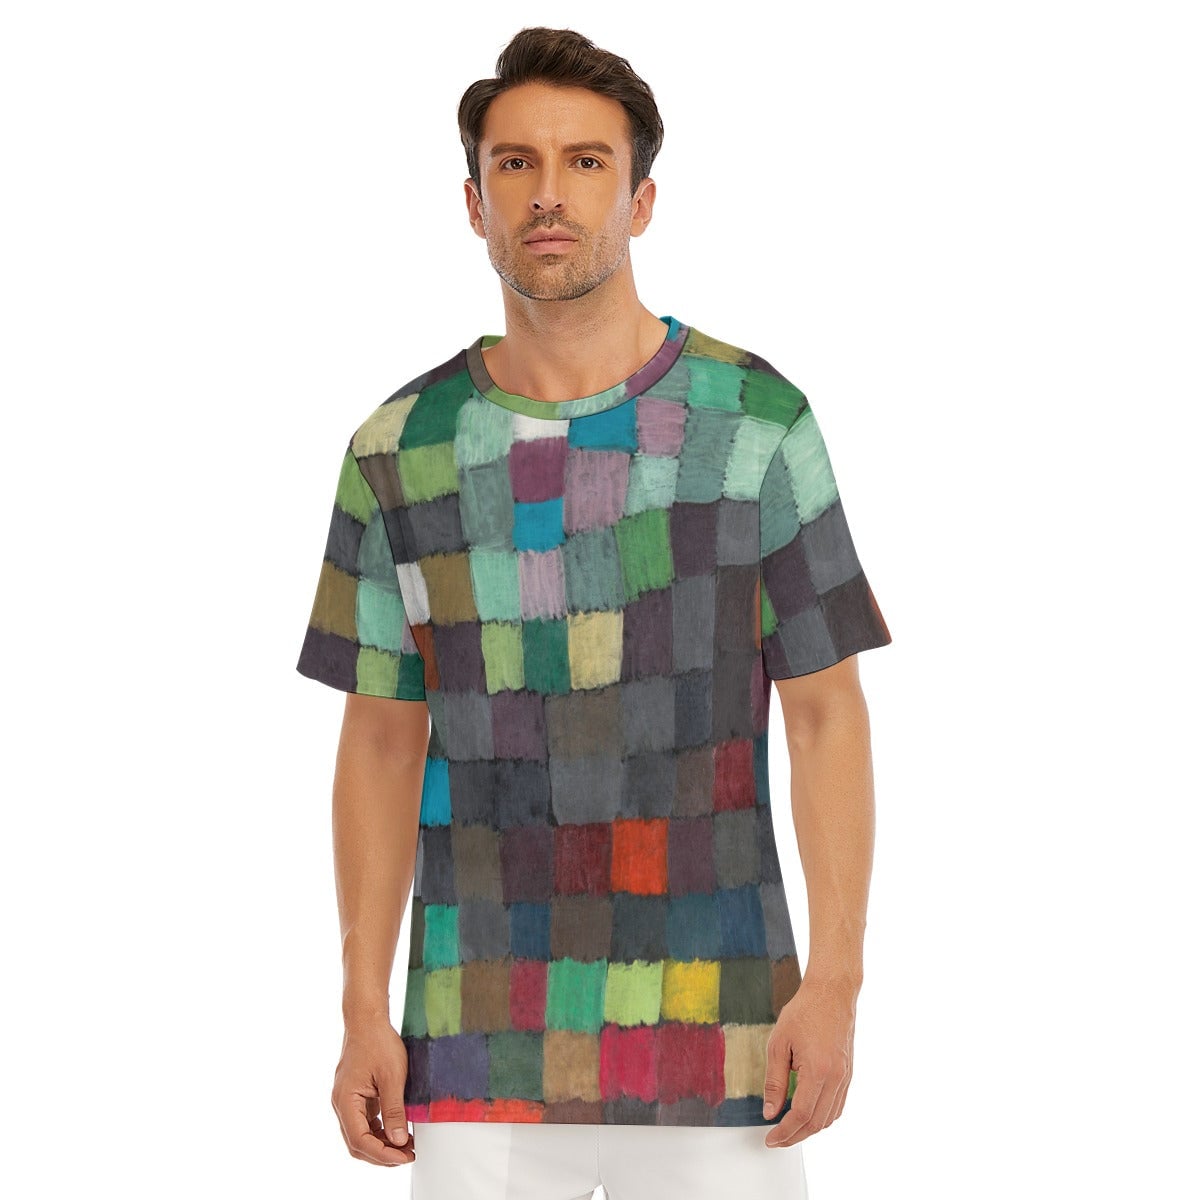 May Picture by Paul Klee T-Shirt - Wear a Work of Art Tee